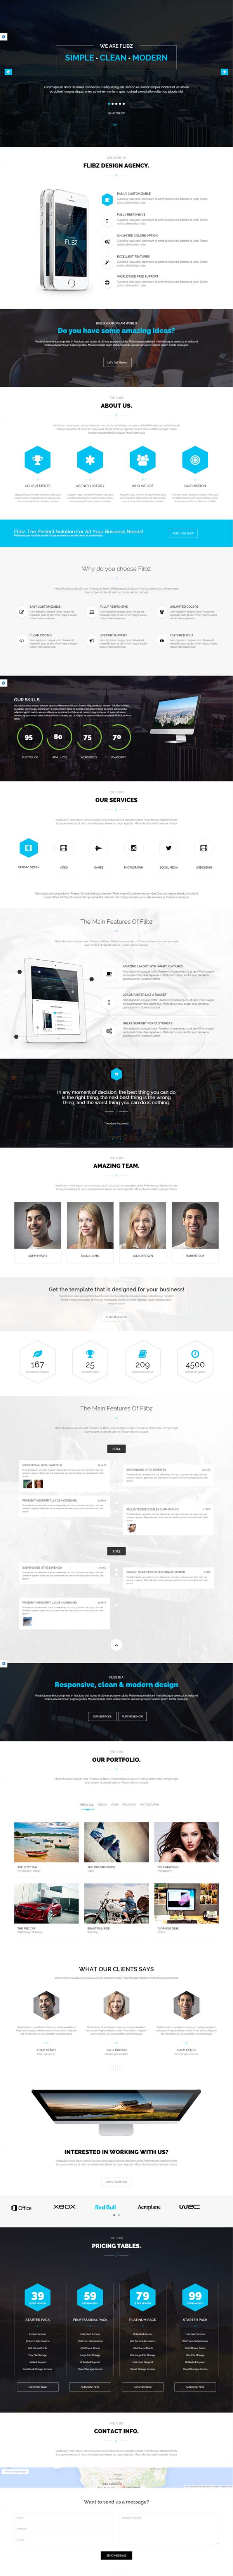 Flibz - One Page Parallax HTML5 Template